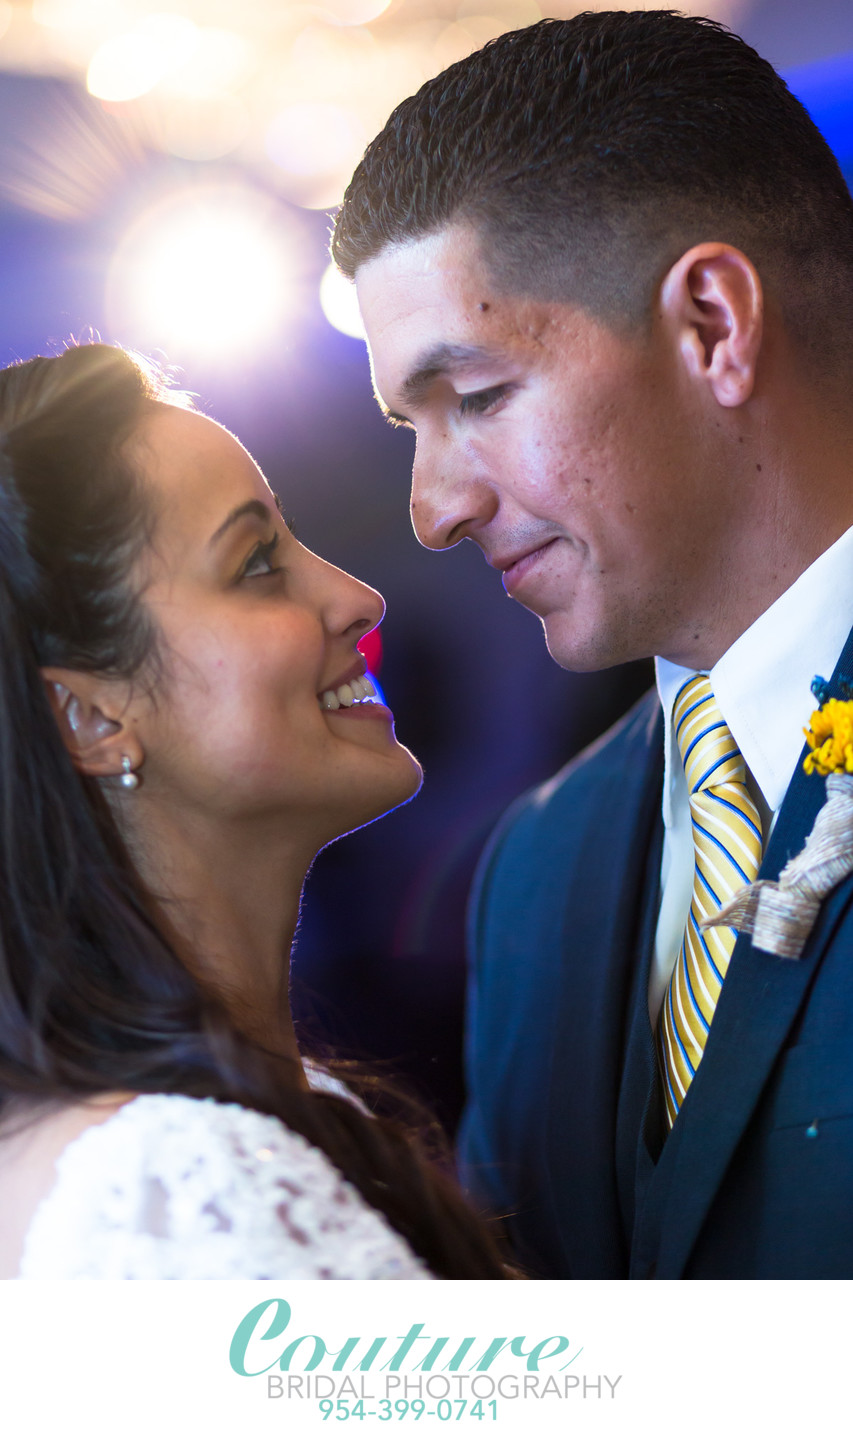 BOOKING A WEDDING PHOTOGRAPHER IN MIAMI